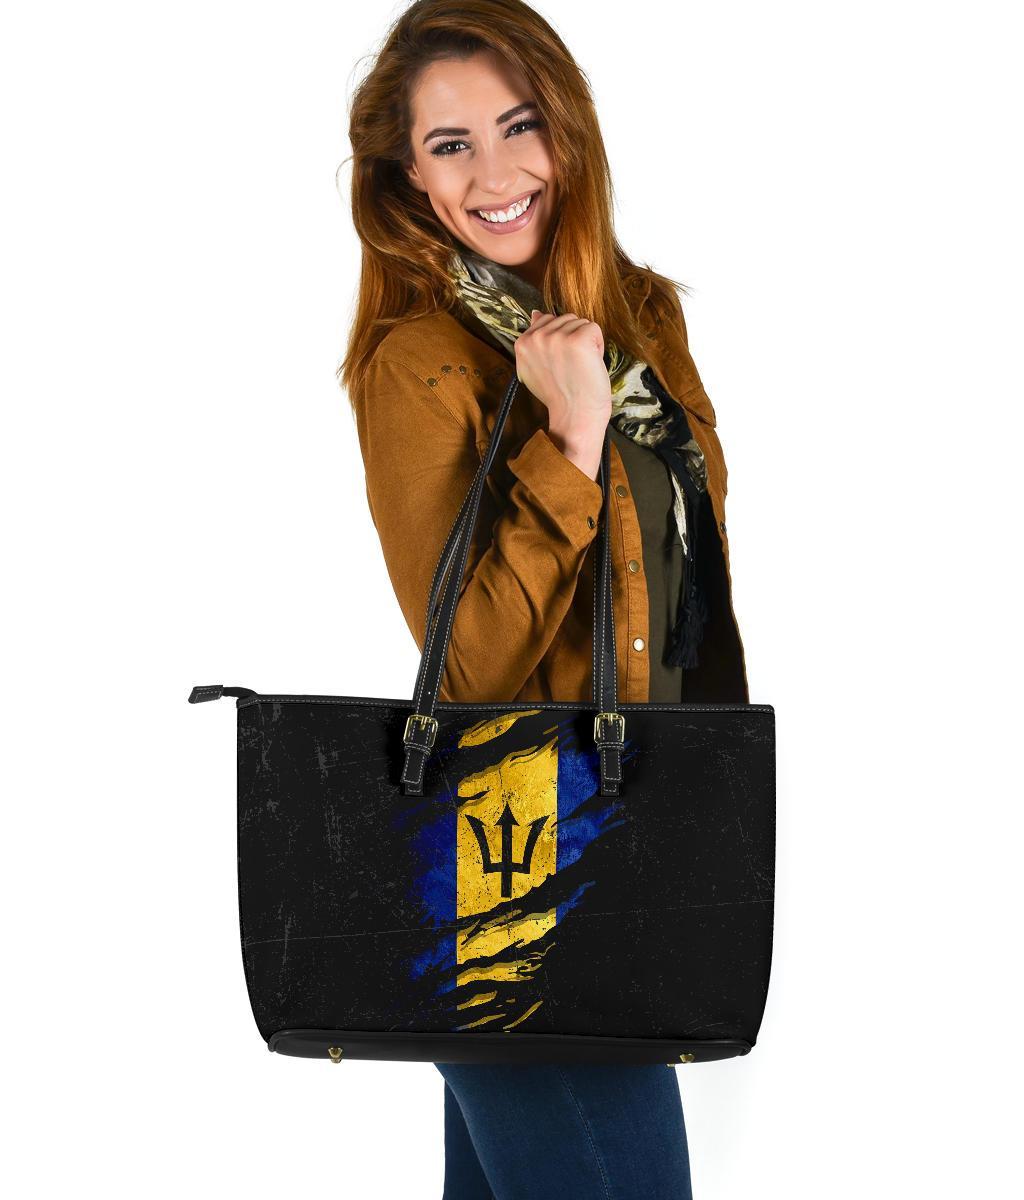 barbados-in-me-large-leather-tote-special-grunge-style